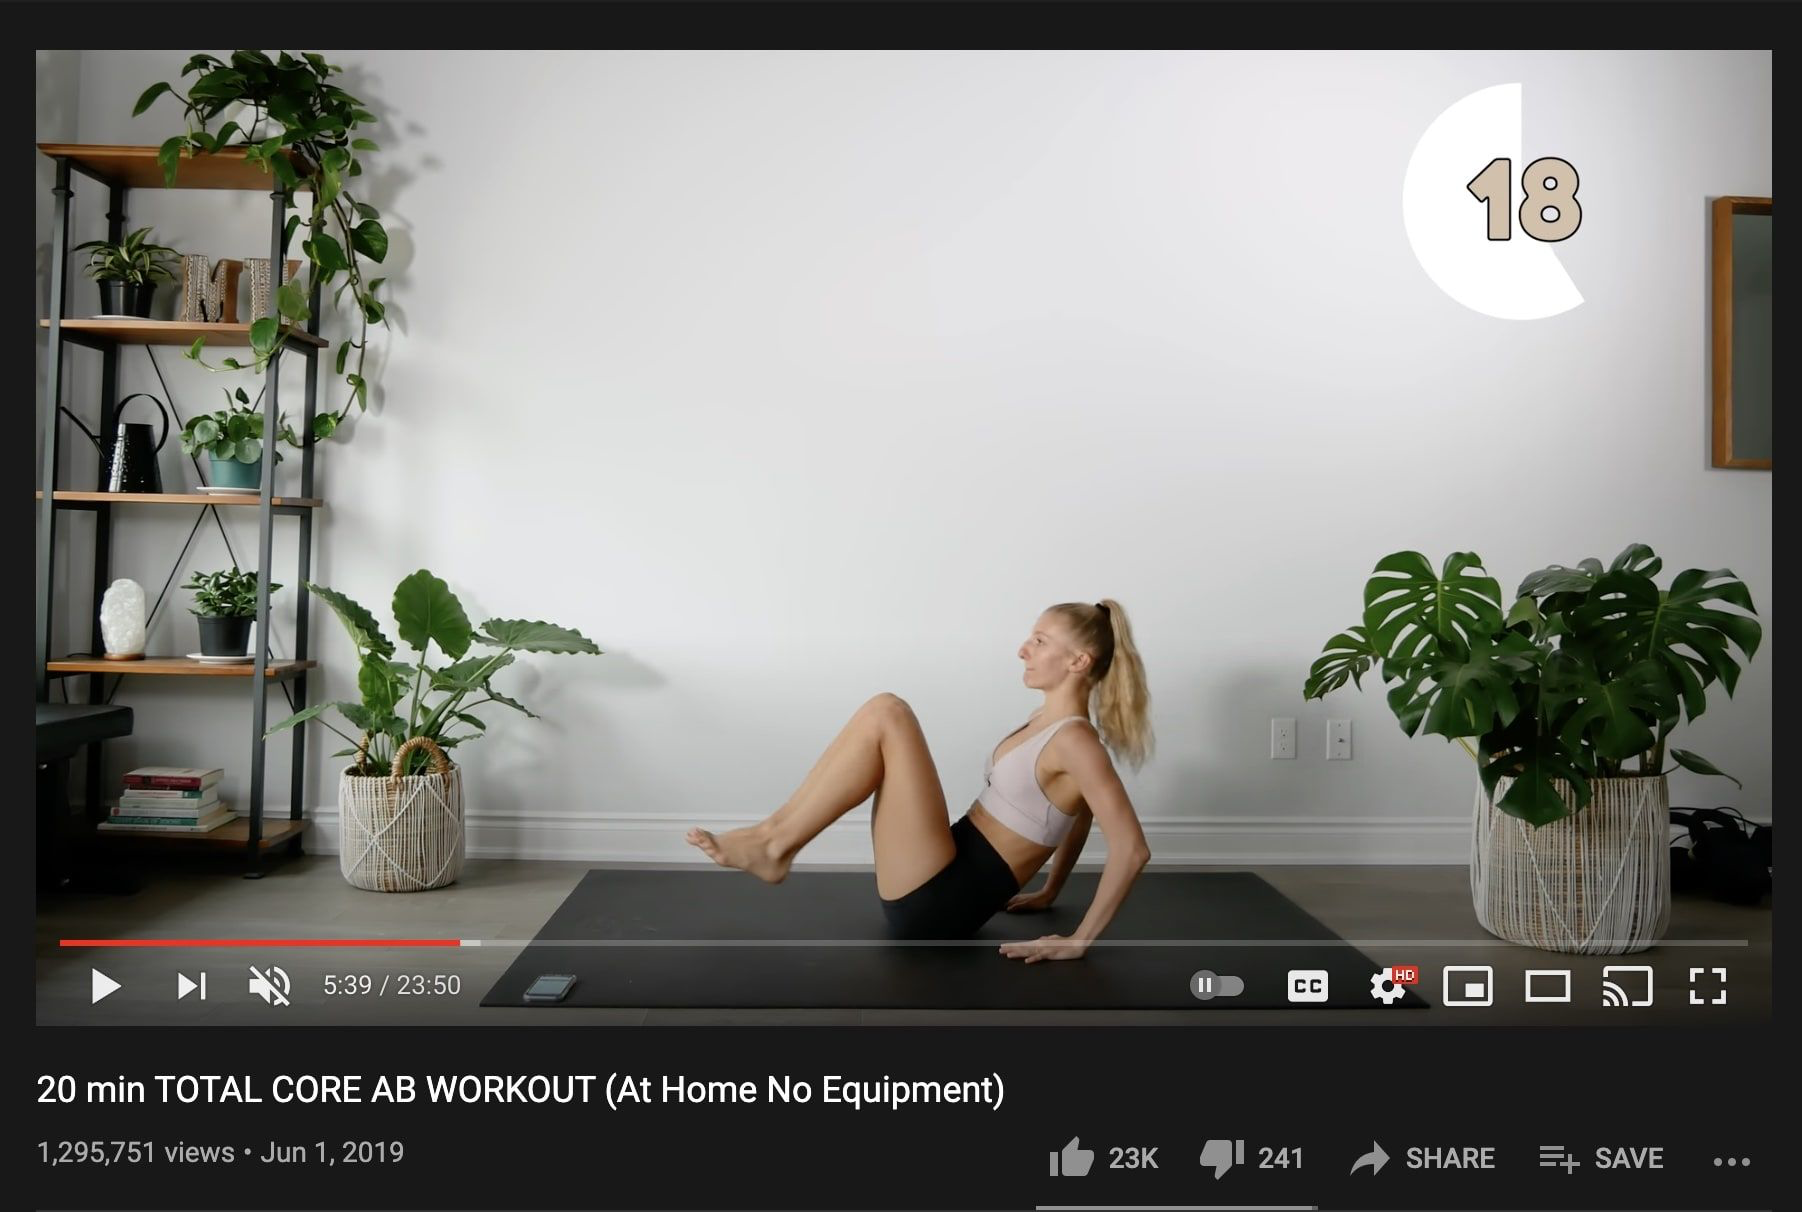 The Top 10 Fitness Searches on YouTube [2021]